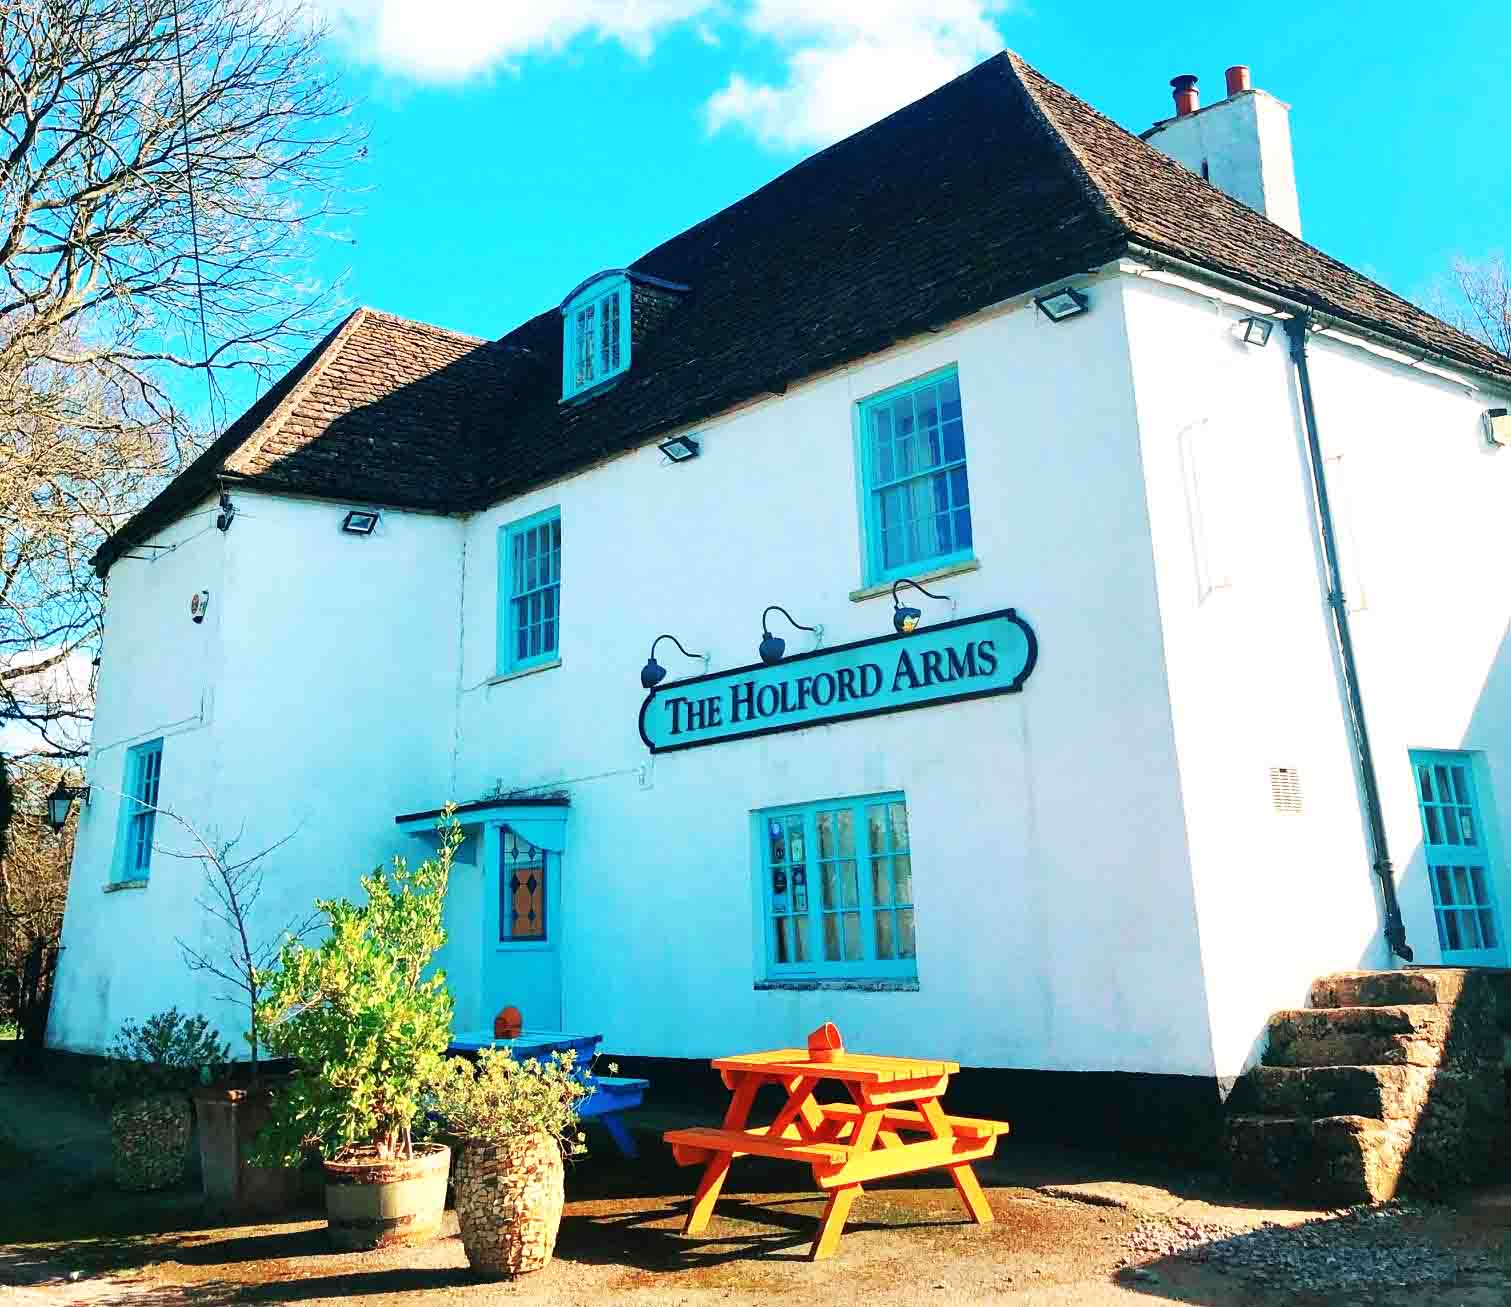 The Holford Arms, Knockdown, Tetbury, Gloucestershire